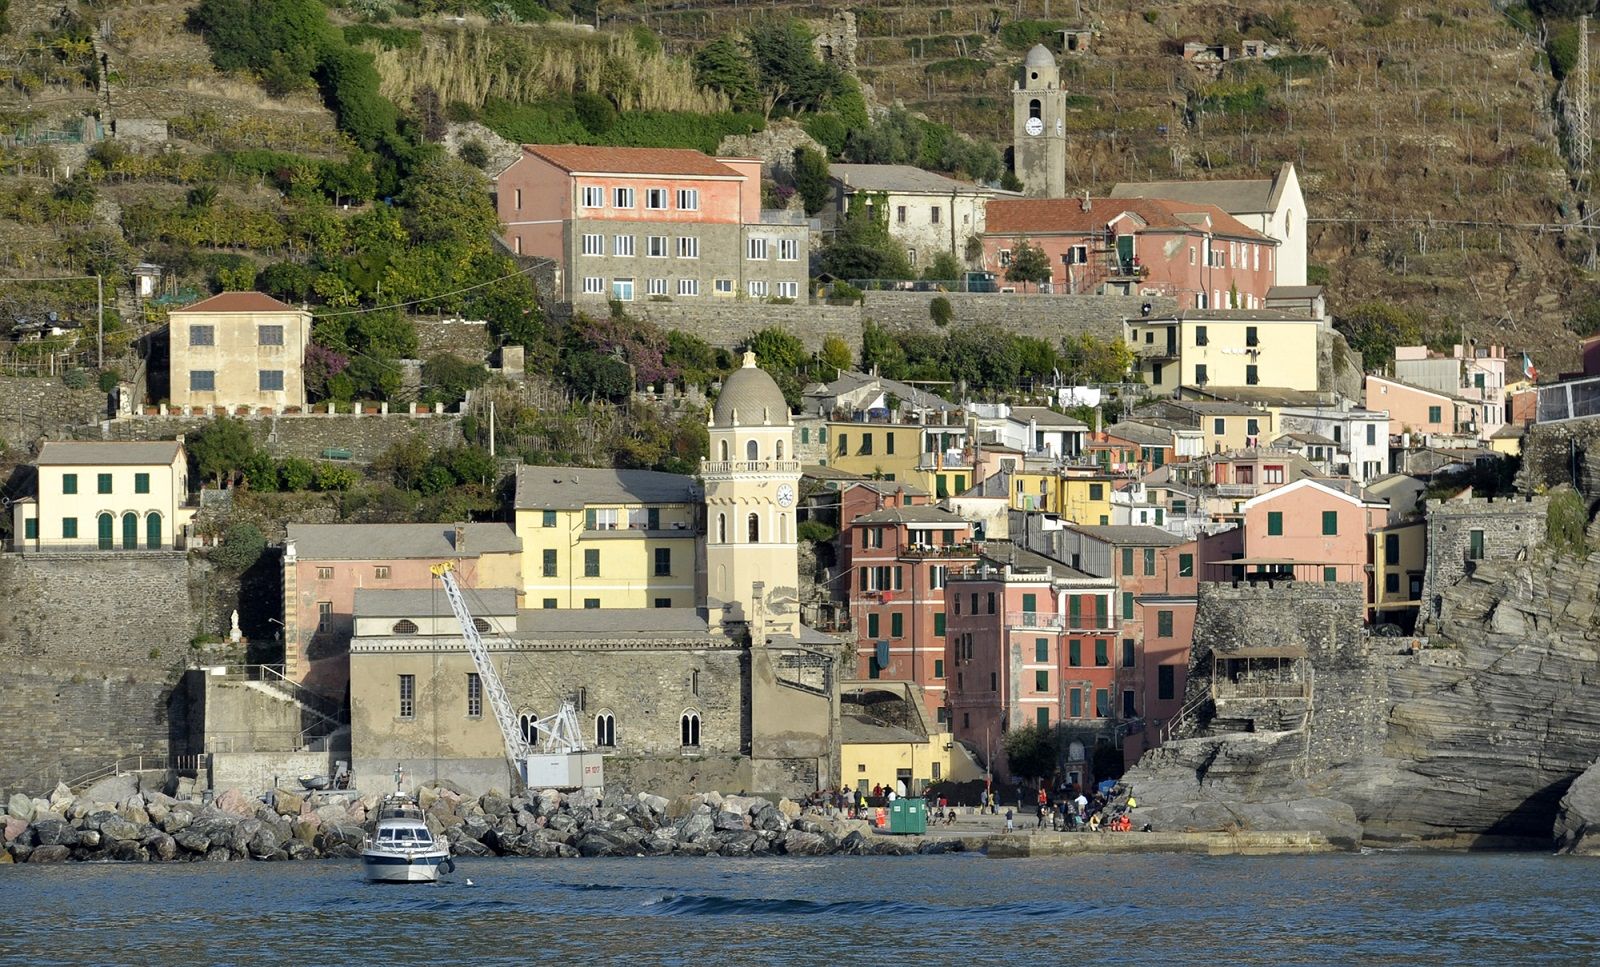 A view of the small town of Vernazza, northern Italy, along the Cinque Terre hiking trail popular for its breathtaking views, taken from the Mediterranean sea Friday, Oct. 28, 2011. Flash floods and mudslides triggered by heavy rains earlier this week barreled through picturesque towns along the northwest coast, burying streets under mud, damaging homes, stores, churches and overturning vehicles. At least nine people died. Among hard-hit towns are Monterosso and Vernazza, along the Cinque Terre hiking trail popular for its breathtaking views. (AP Photo/Marco Vasini)